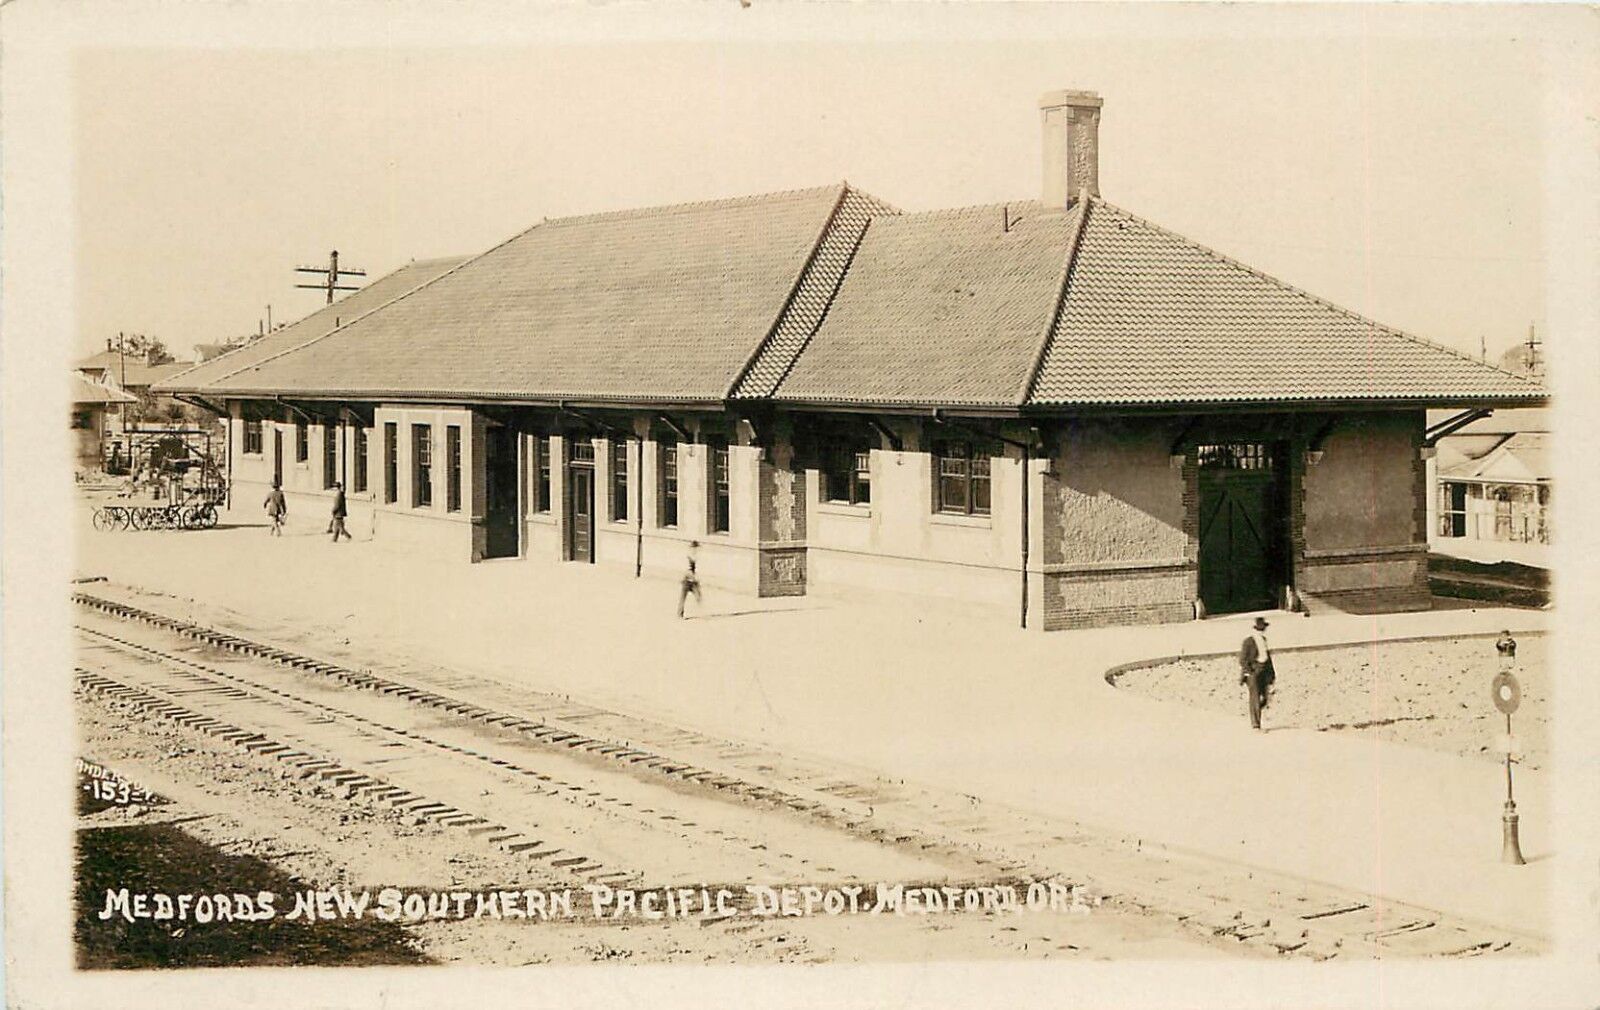 c1910 RPPC New Southern Paciffic RR Depot, Medford OR Jackson Co., Anderson 153